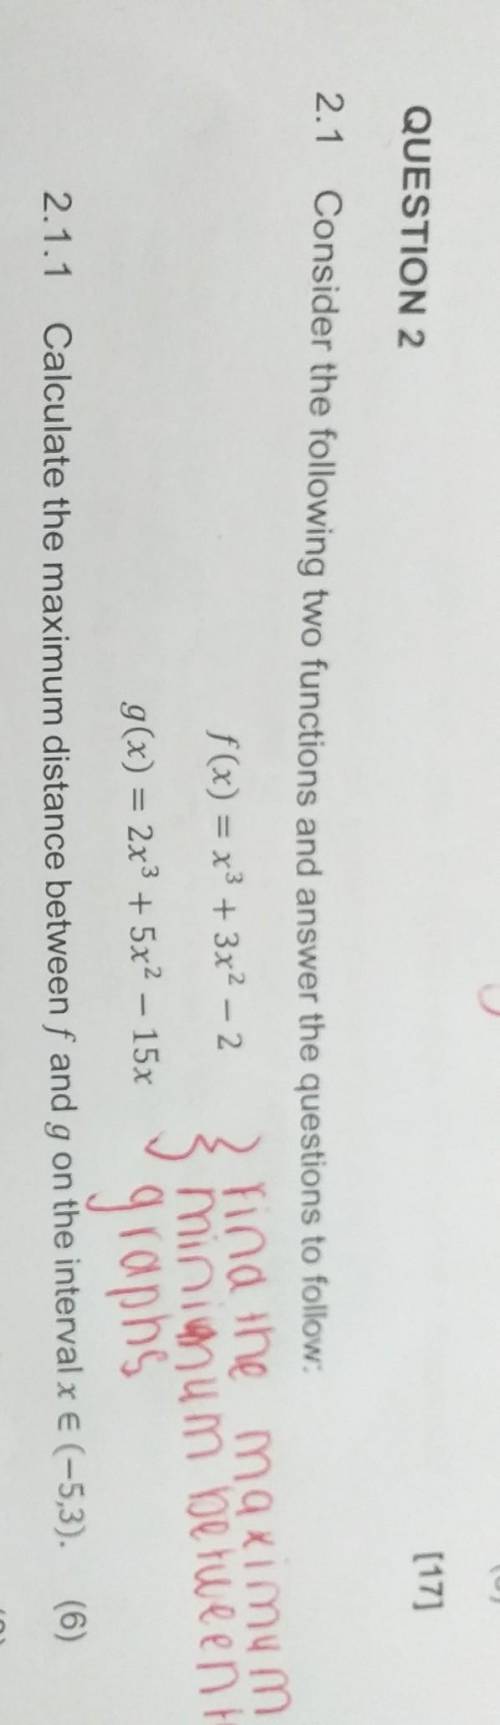 Hi, am I supposed to find the stationary points of the f(x) and g(x) then use the distance formula